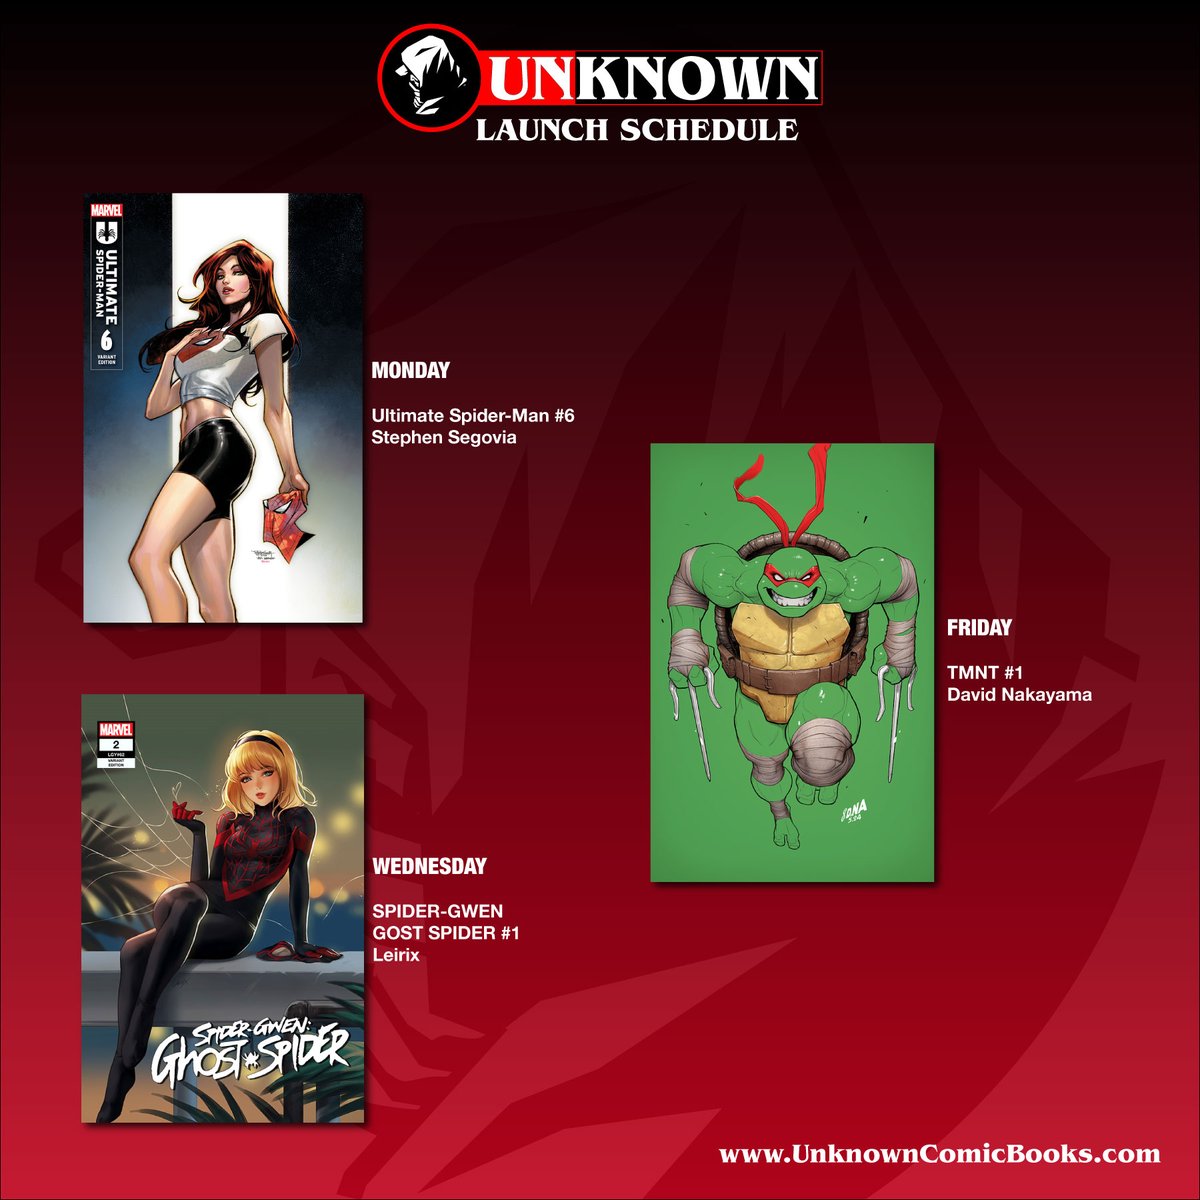 This week at Unknown Comics - it's all about the heroes!  Exclusive covers for Ultimate Spider-Man #6, Spider-Gwen Ghost-Spider #2 & Teenage Mutant Ninja Turtles #1!  Pre-order starts 5/13: UnknownComicBooks.com #Exclusives #UnknownComics #Comics #Superheroes